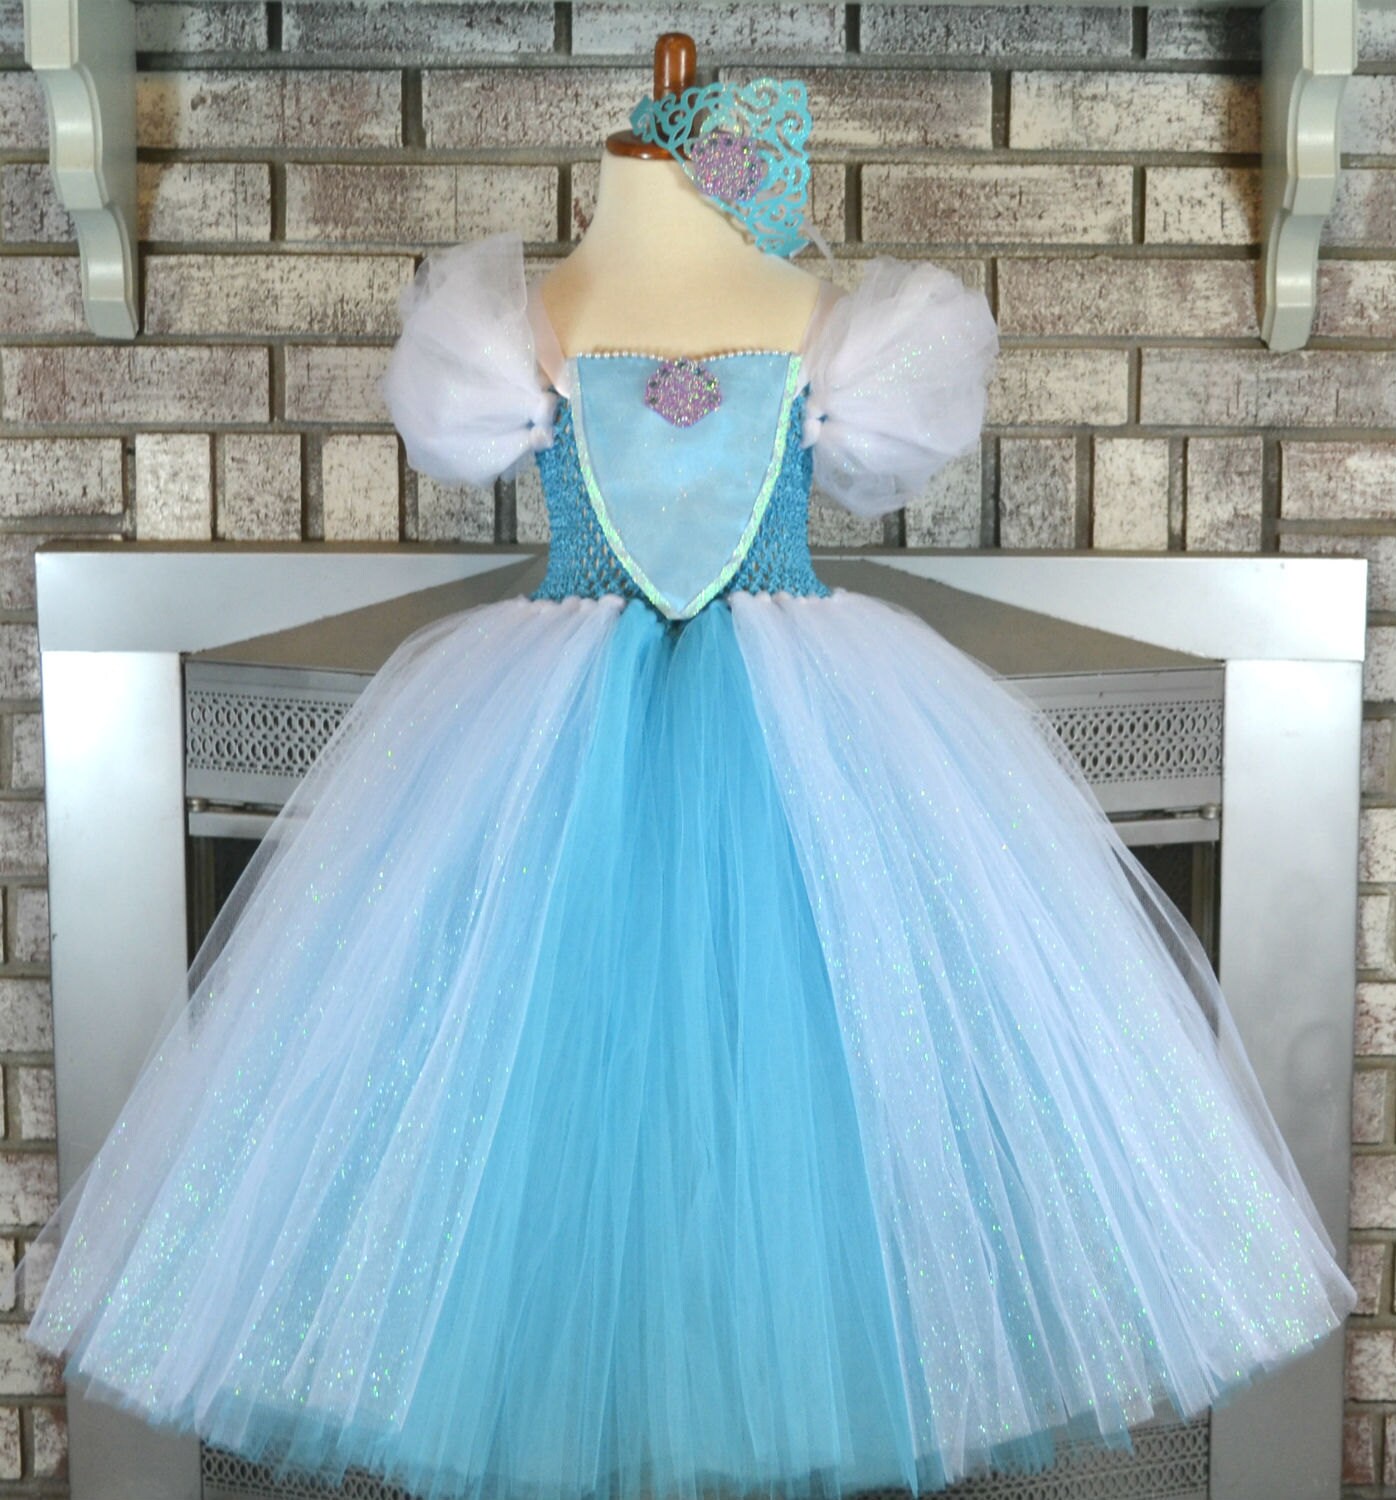 Deluxe Turquoise Tutu Ball Gown Dress Costume Ocean Theme